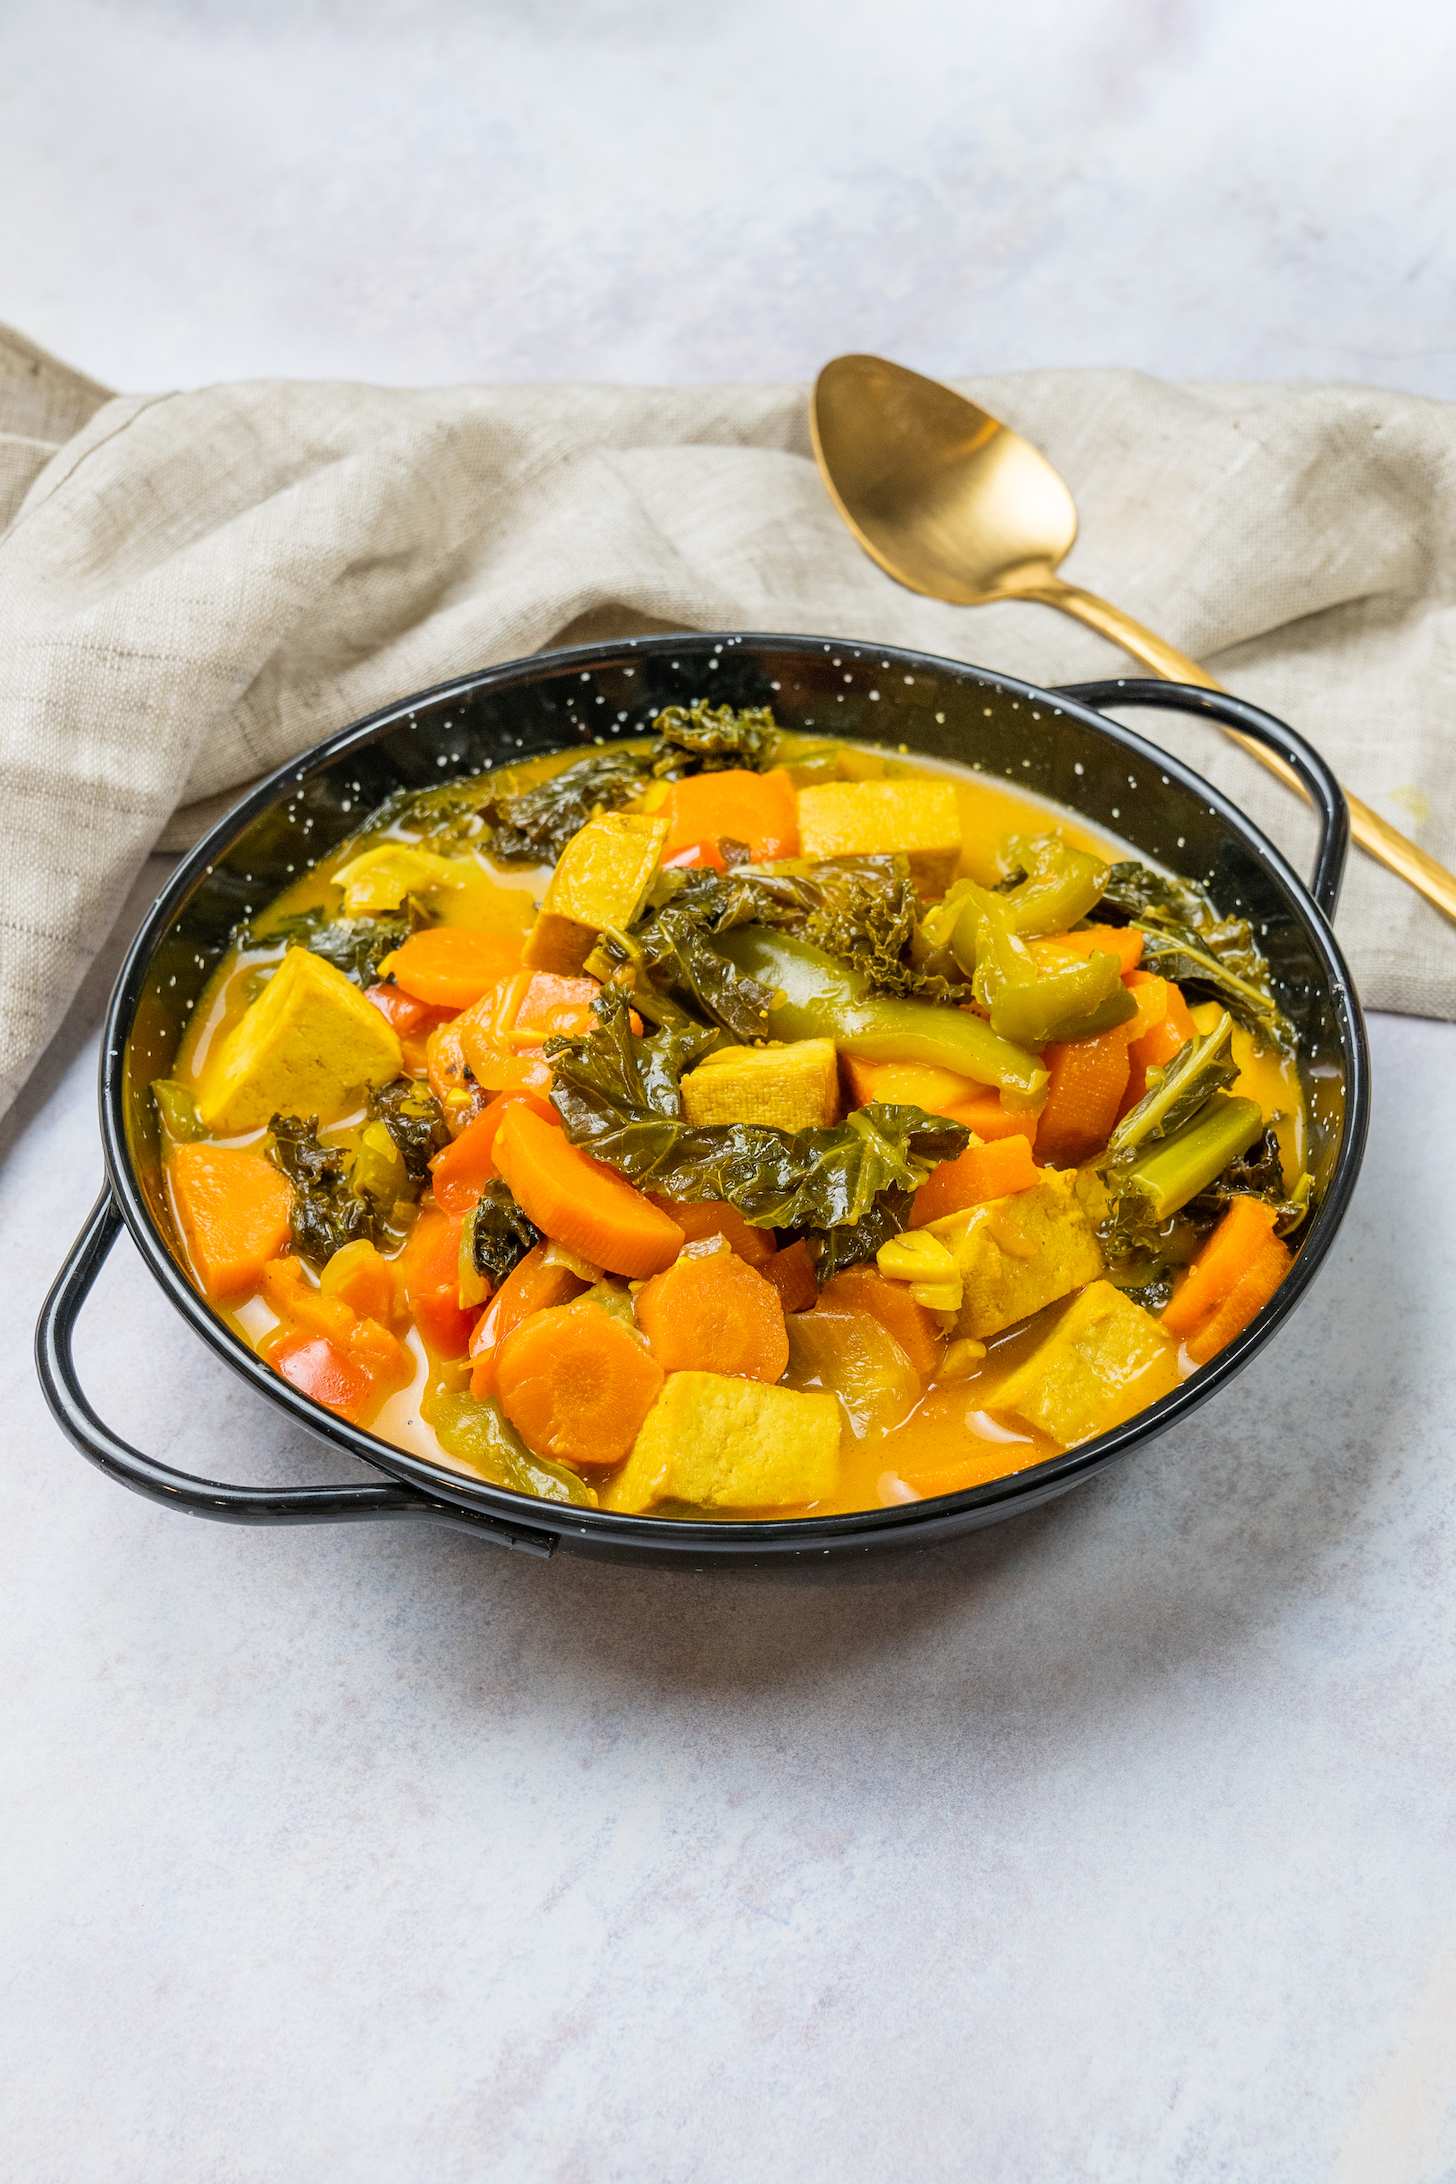 Tofu, kale, and carrot soup in a shallow pan. It is located on a light gray background next to a golden spoon and a cloth napkin.